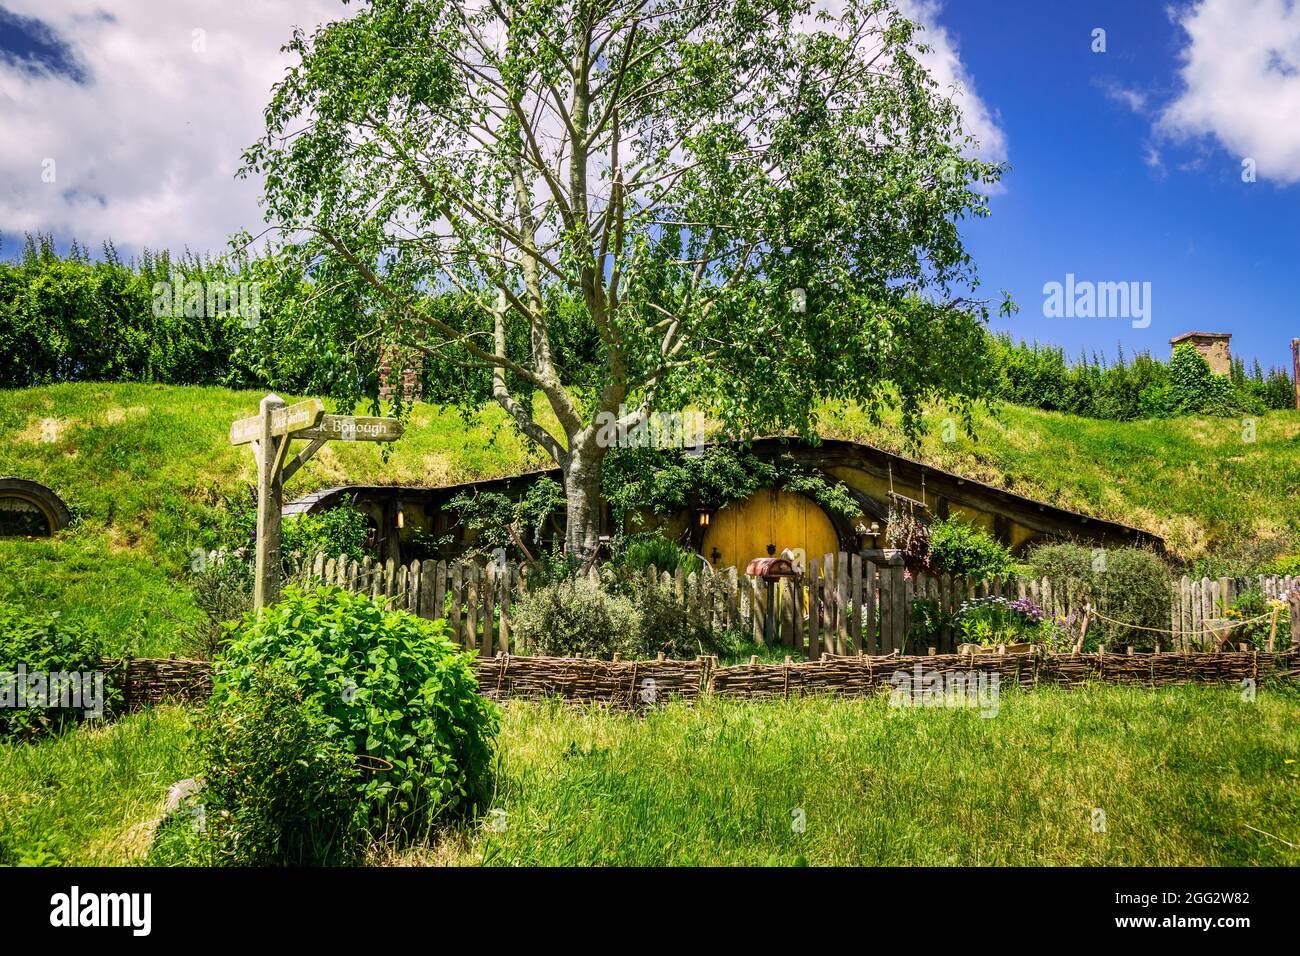 Yellow Door Hobbit Hole Home On The Hobbiton Movie Set For The Lord Of The Rings Movie Trilogy In Matamata New Zealand A Popular Tourist Attraction Stock Photo